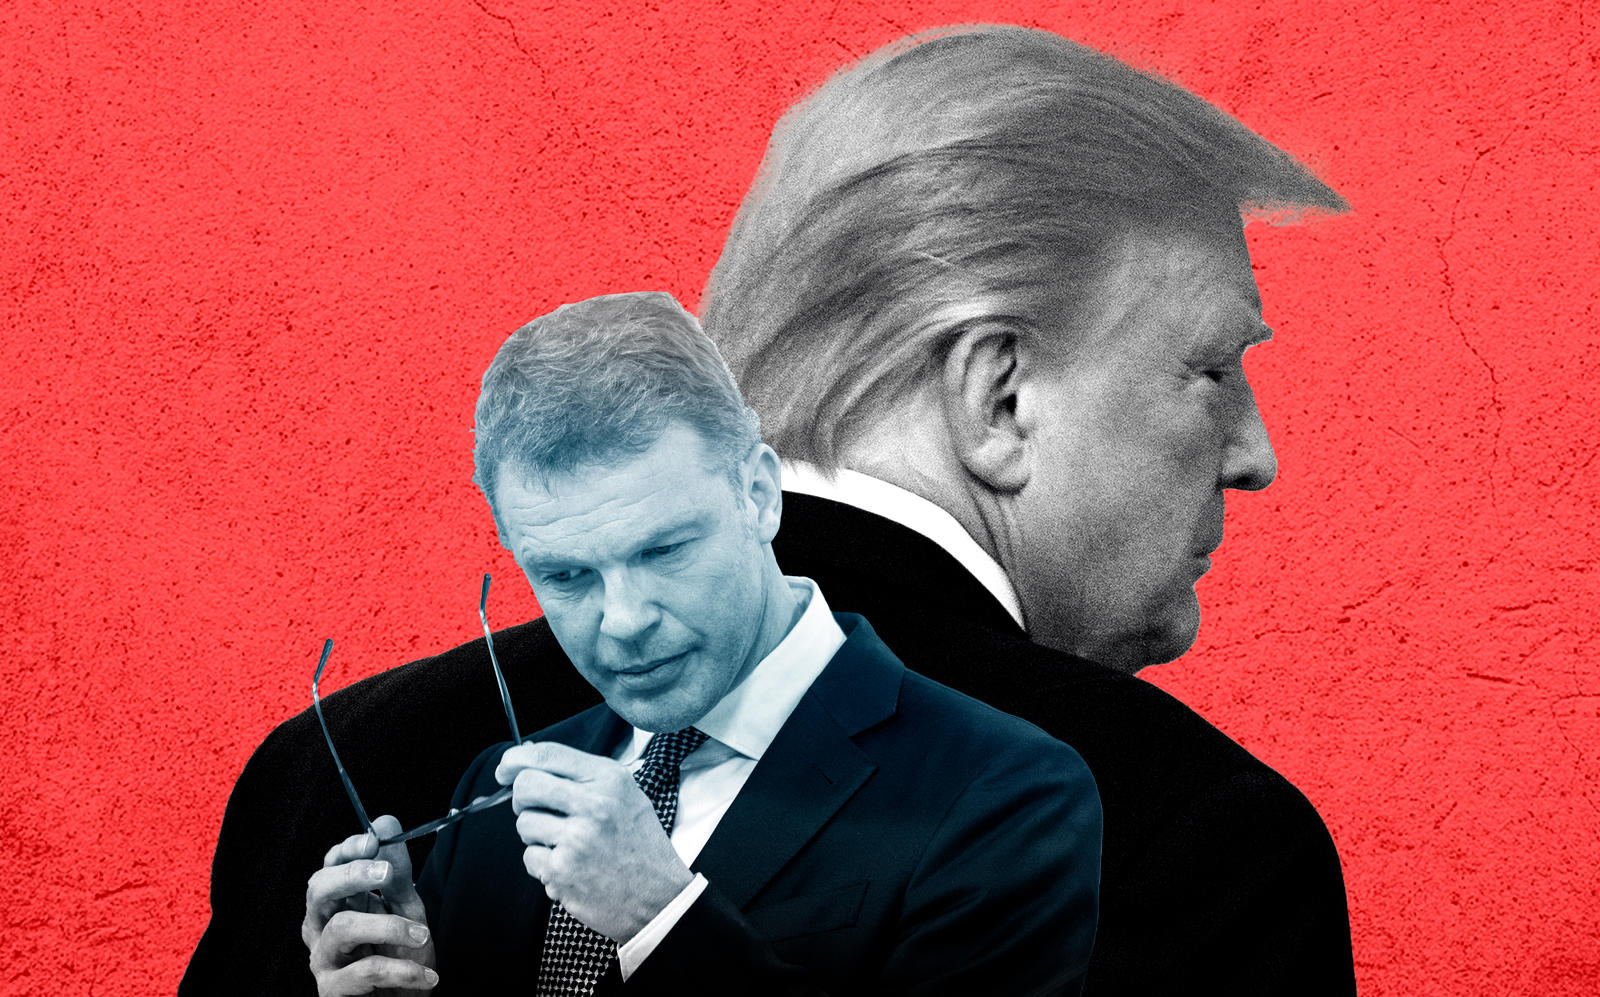 Deutsche Bank CEO Christian Sewing and President Donald Trump (Sewing by Thomas Lohnes/Getty Images; Trump by Drew Angerer/Getty Images)